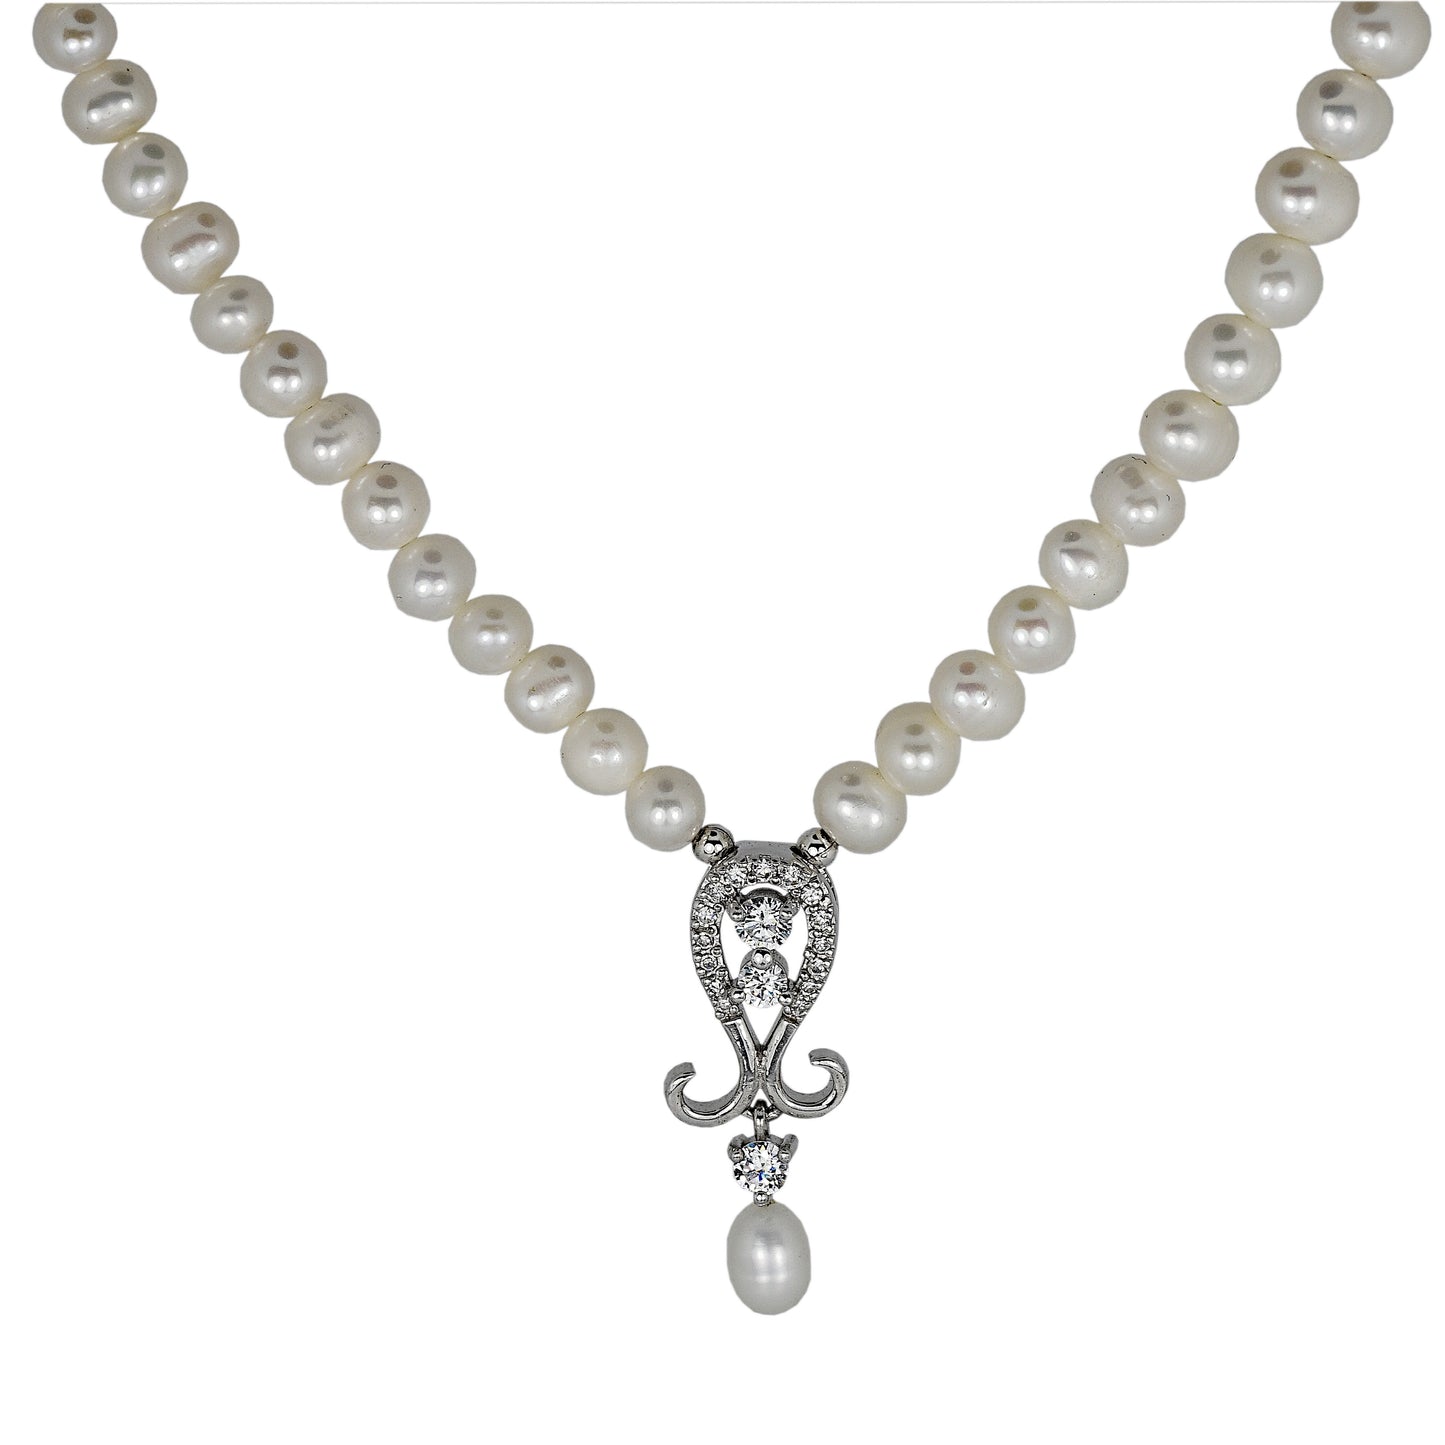 Handmade Freshwater Cultured Pearls with a CZ Pendant